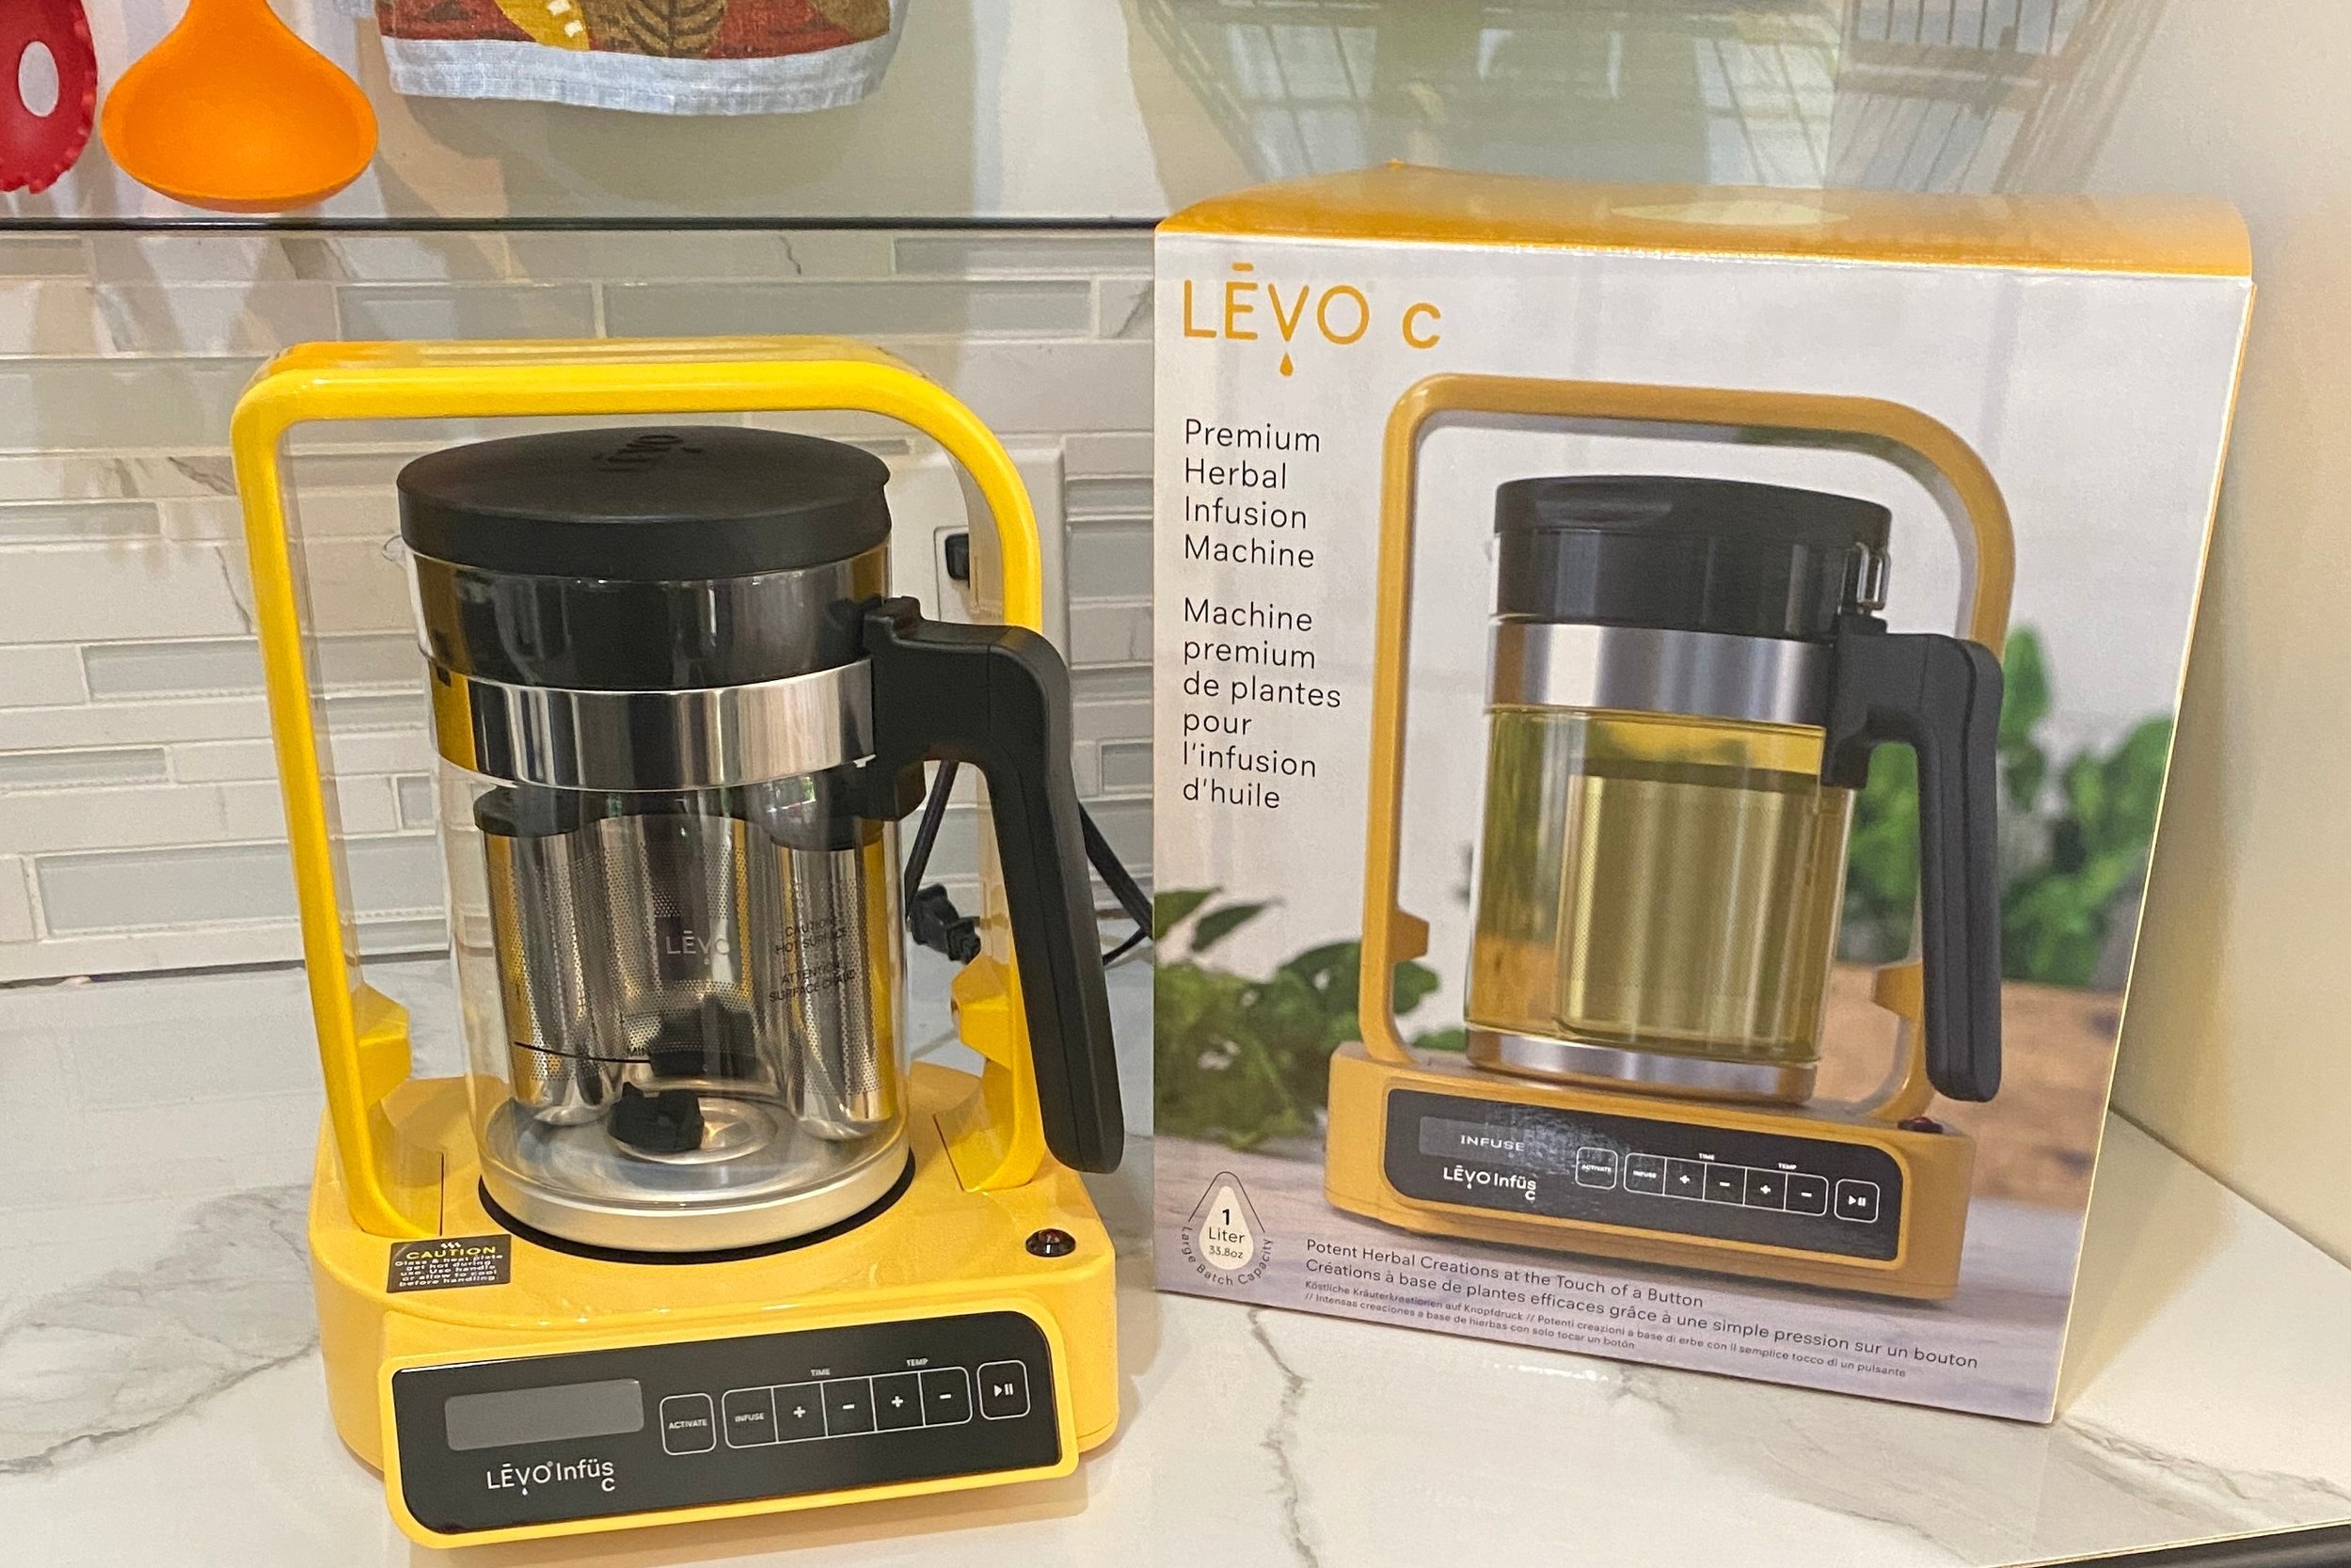 How to Make Big Batches of Cannabis Infused Oil with The New LEVO C (Review)